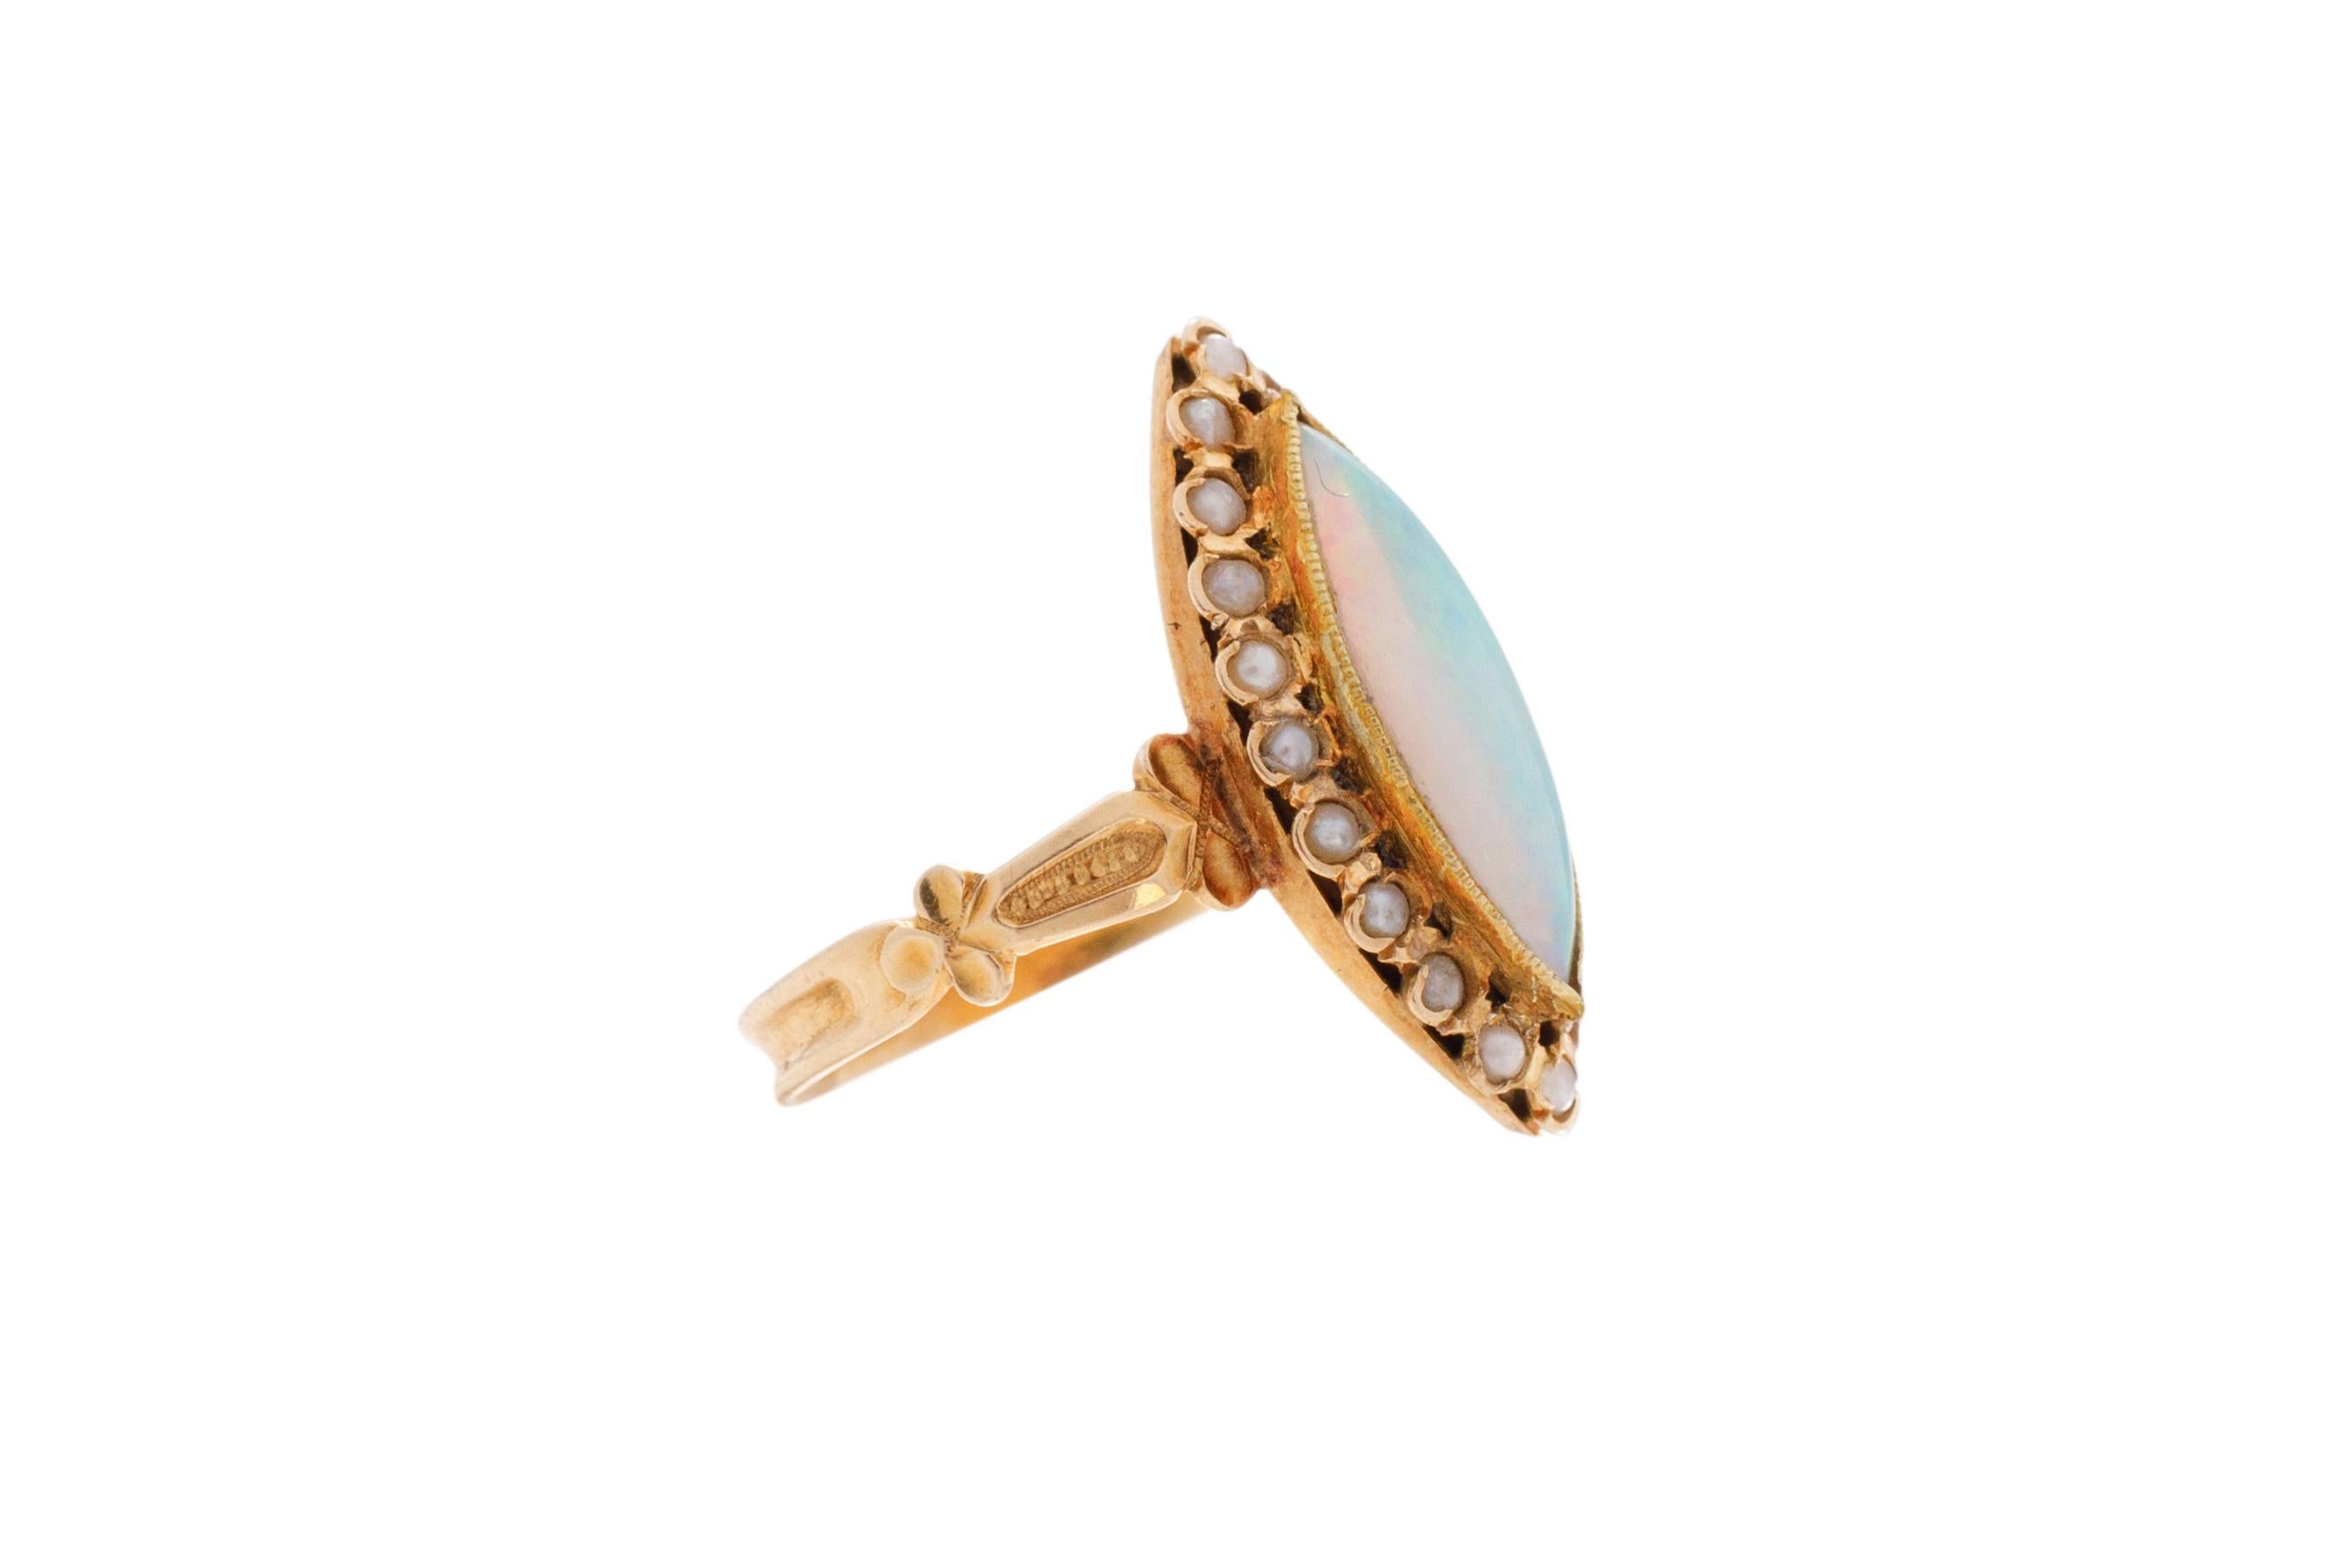 Ring Size: 5.75
Metal Type: 18 karat Yellow Gold [Hallmarked, and Tested]
Weight: 3.0 grams

Center Stone Details:
Weight: 2.00 carat
Cut: Marquise Cabachon
Type: Opal

Side Stone Details:
Weight: .75 carat
Cut: Round
Type: Natural seed